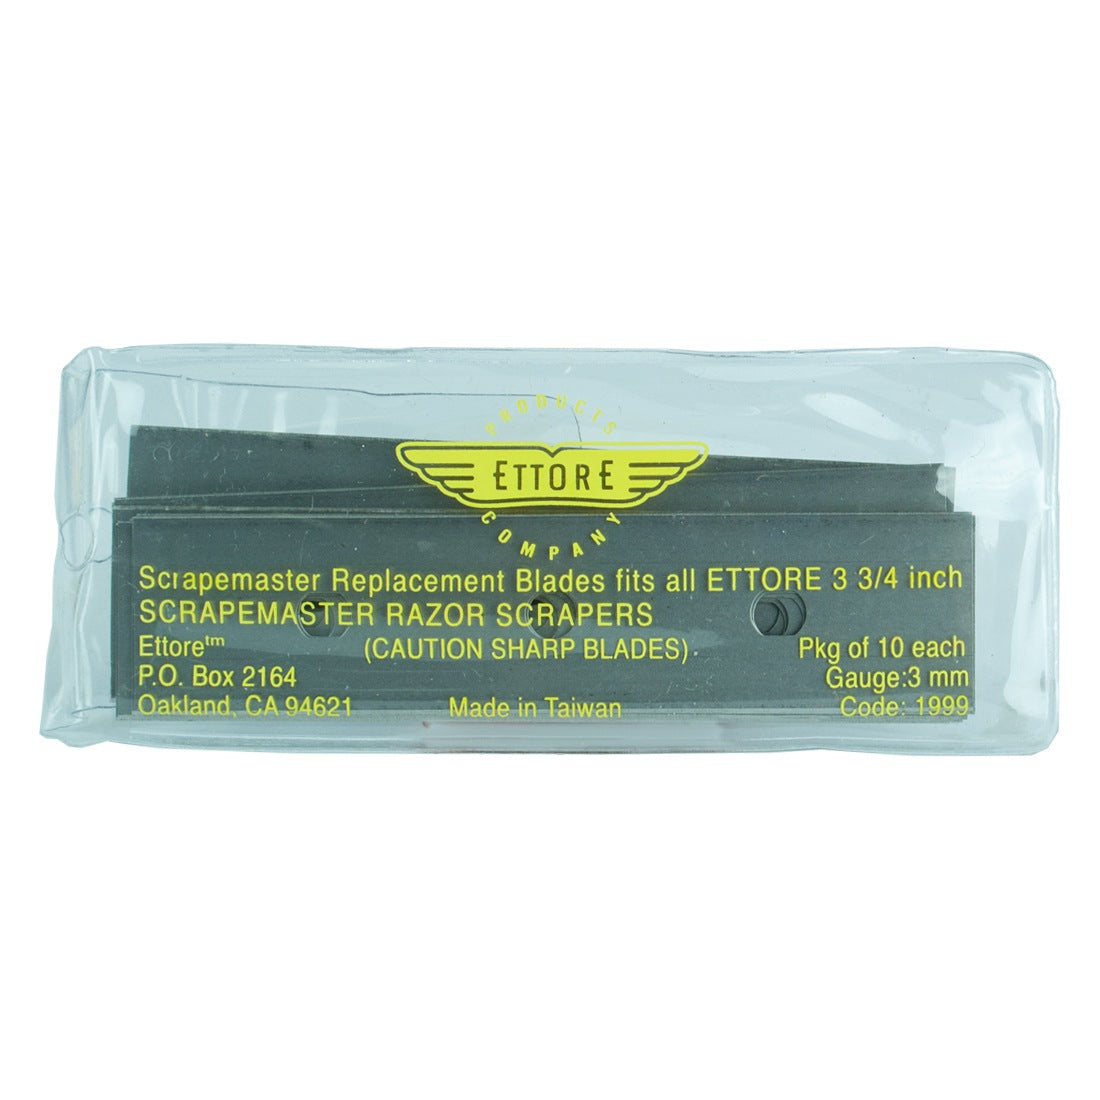 Ettore Scrapemaster Replacement Carbon Blades - 4 Inch - In Pack Front View